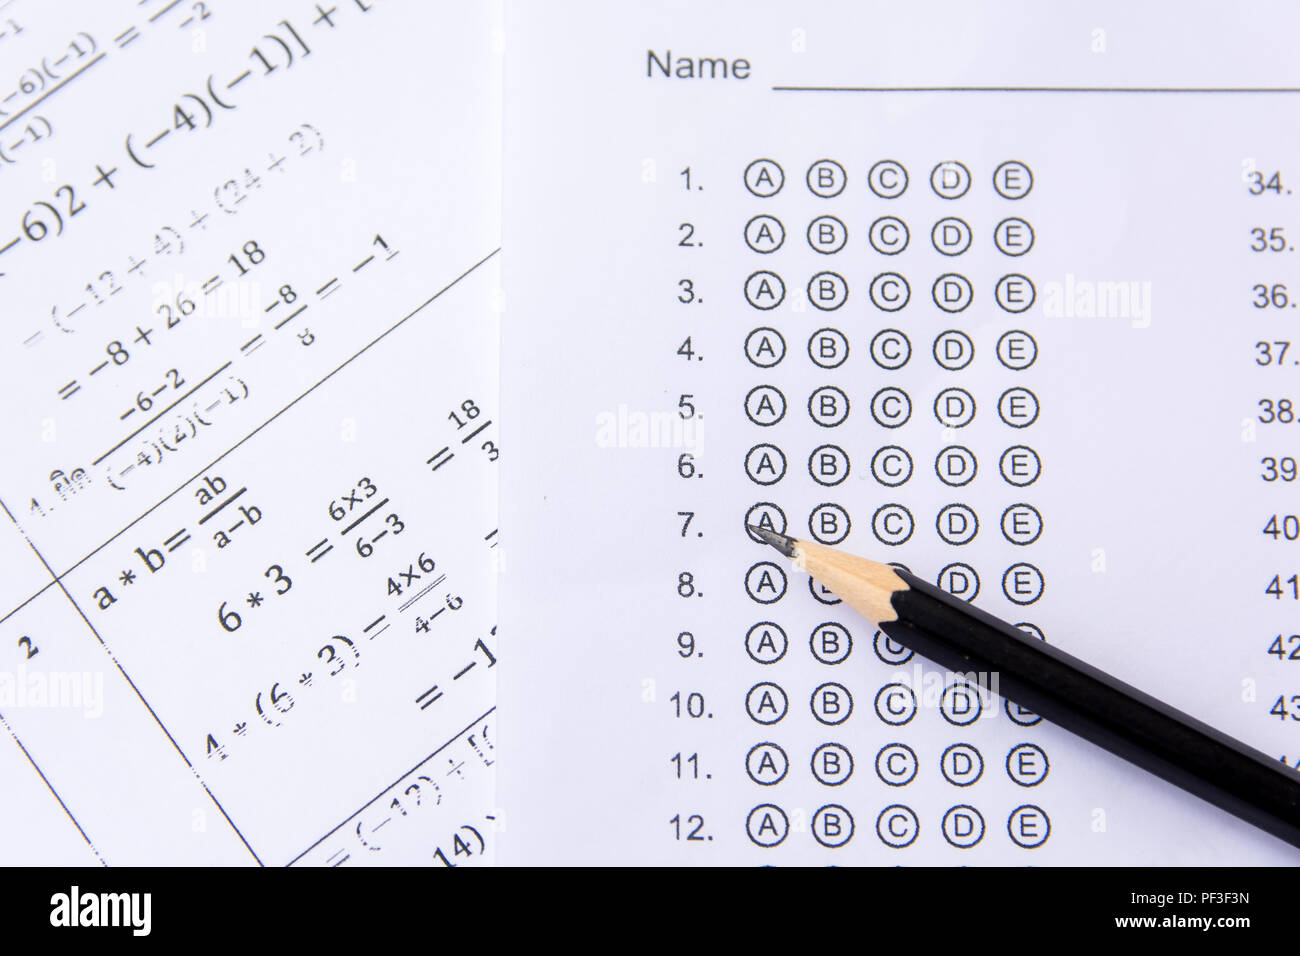 Pencil on answer sheets or Standardized test form with answers bubbled. multiple choice answer sheet Stock Photo